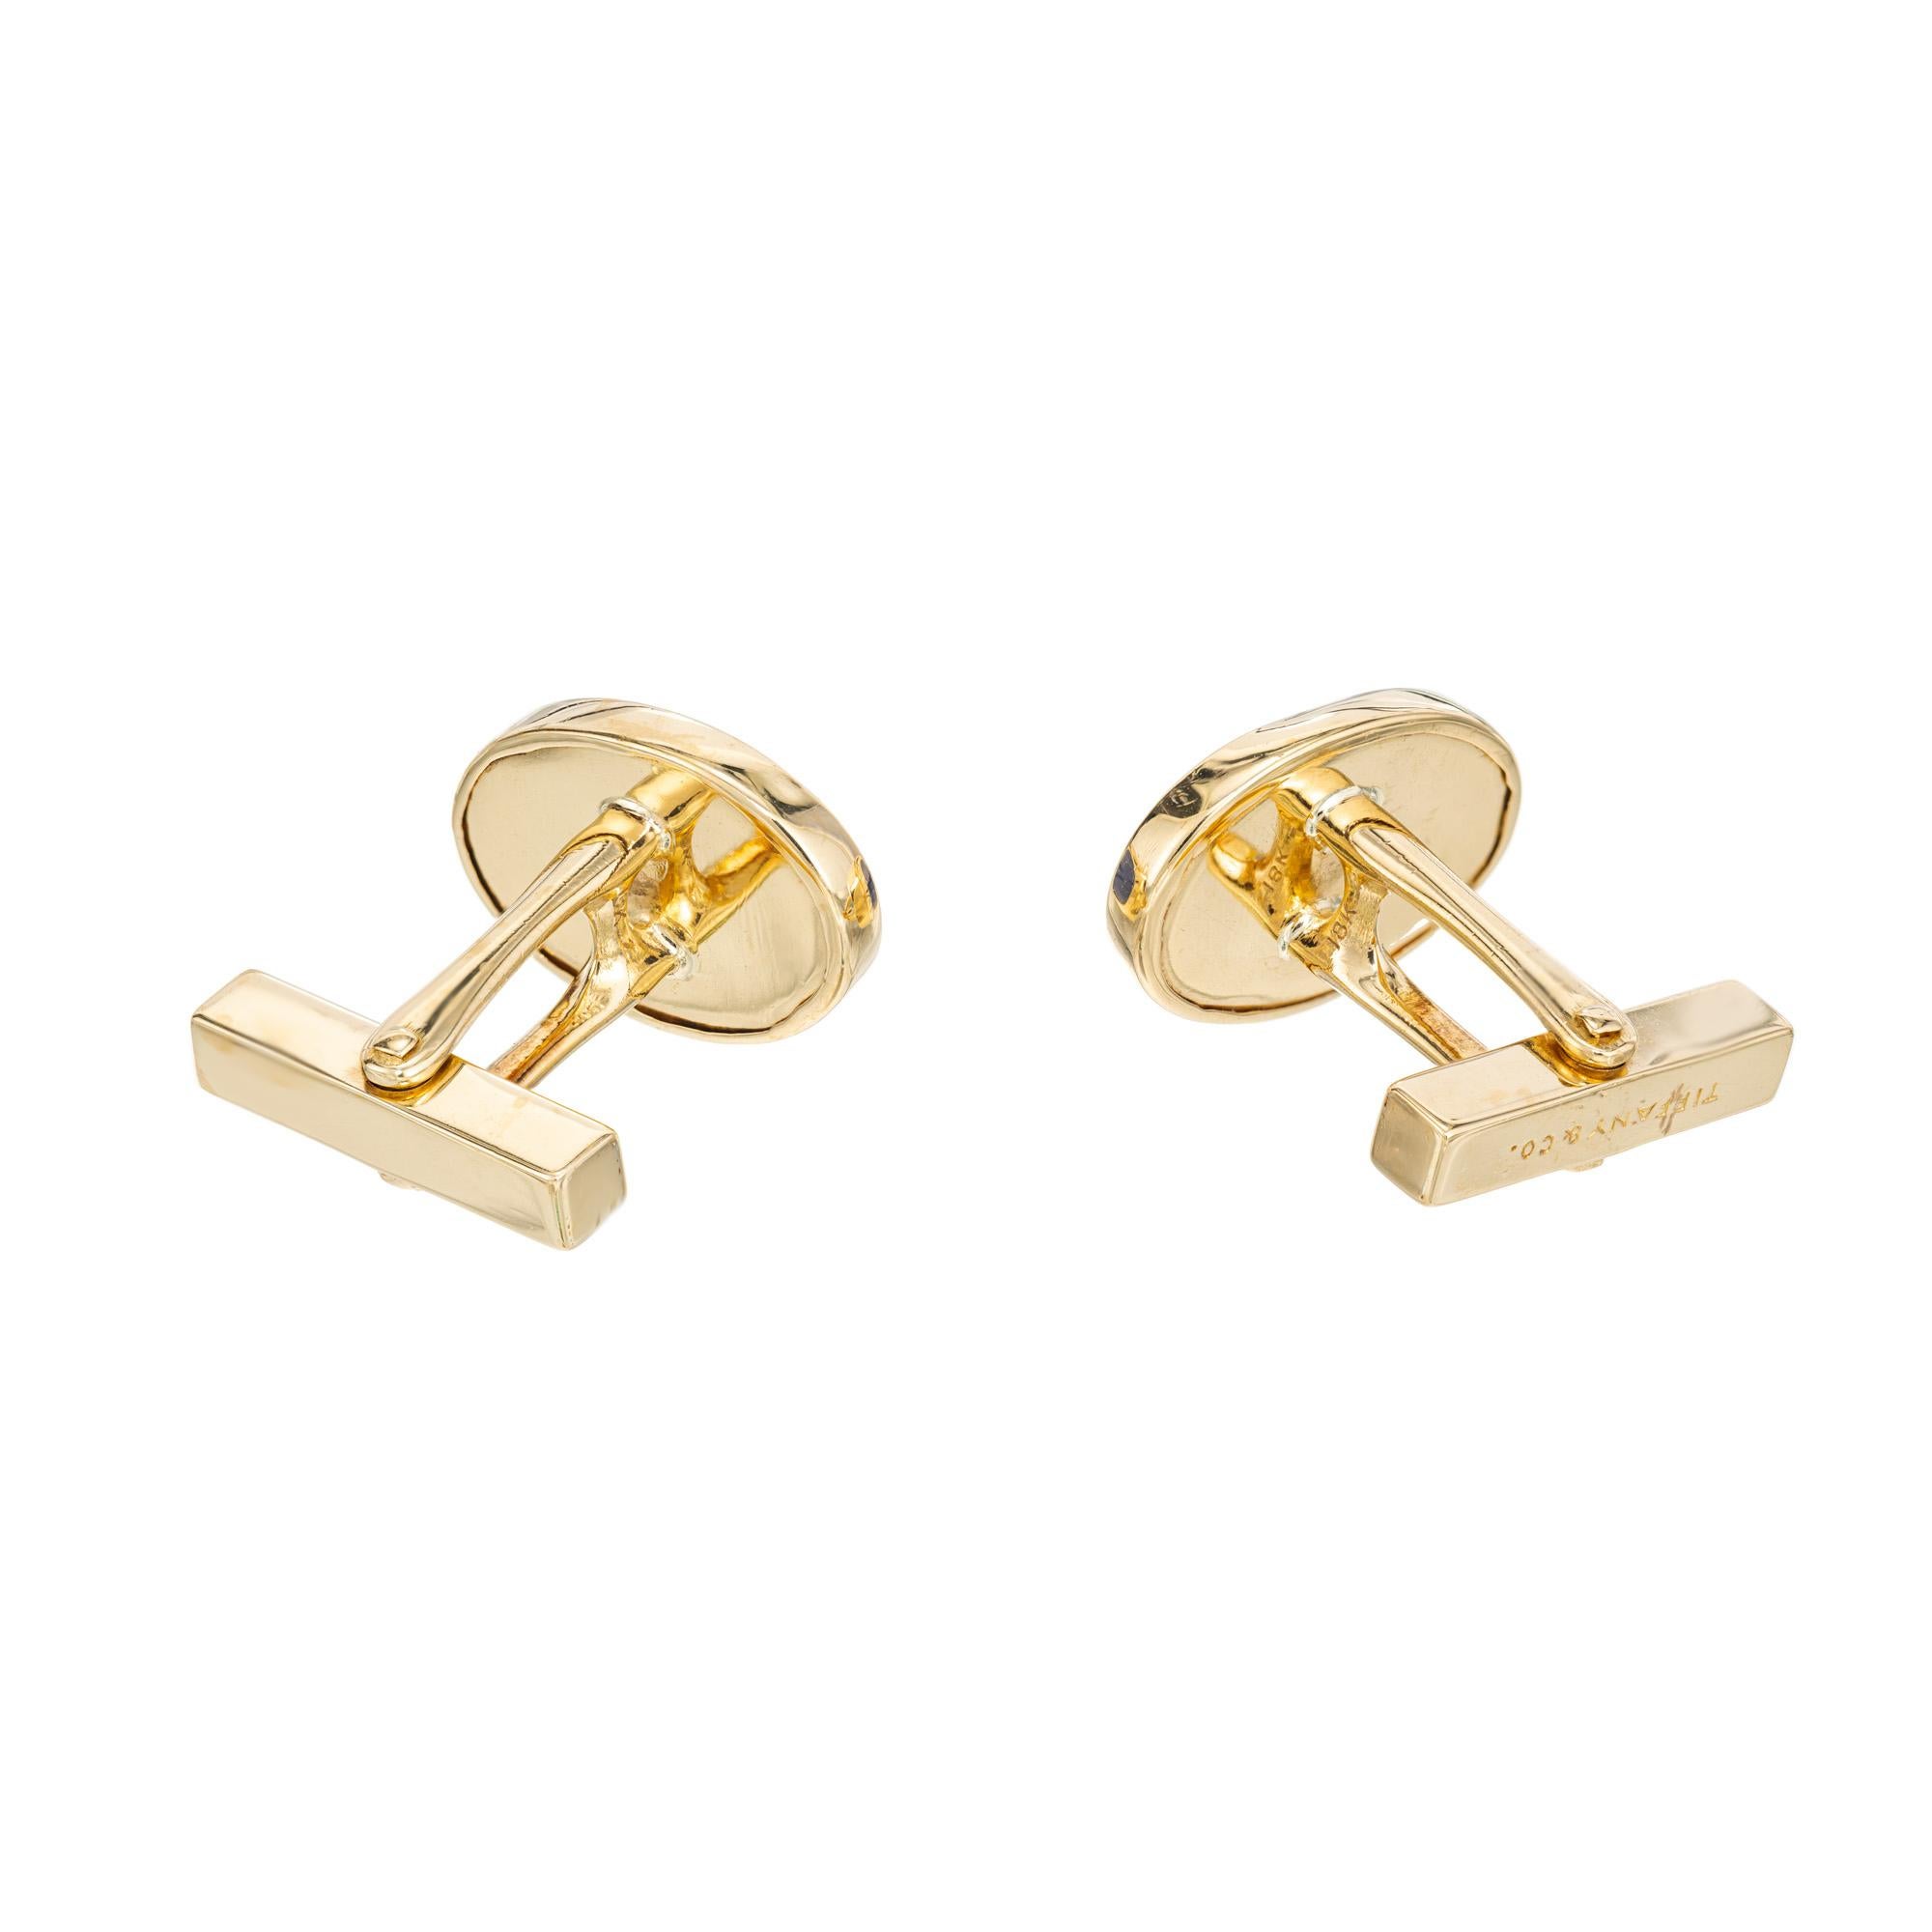 Tiffany & Co Lapis Lazulli Yellow Gold Cufflinks In Good Condition For Sale In Stamford, CT